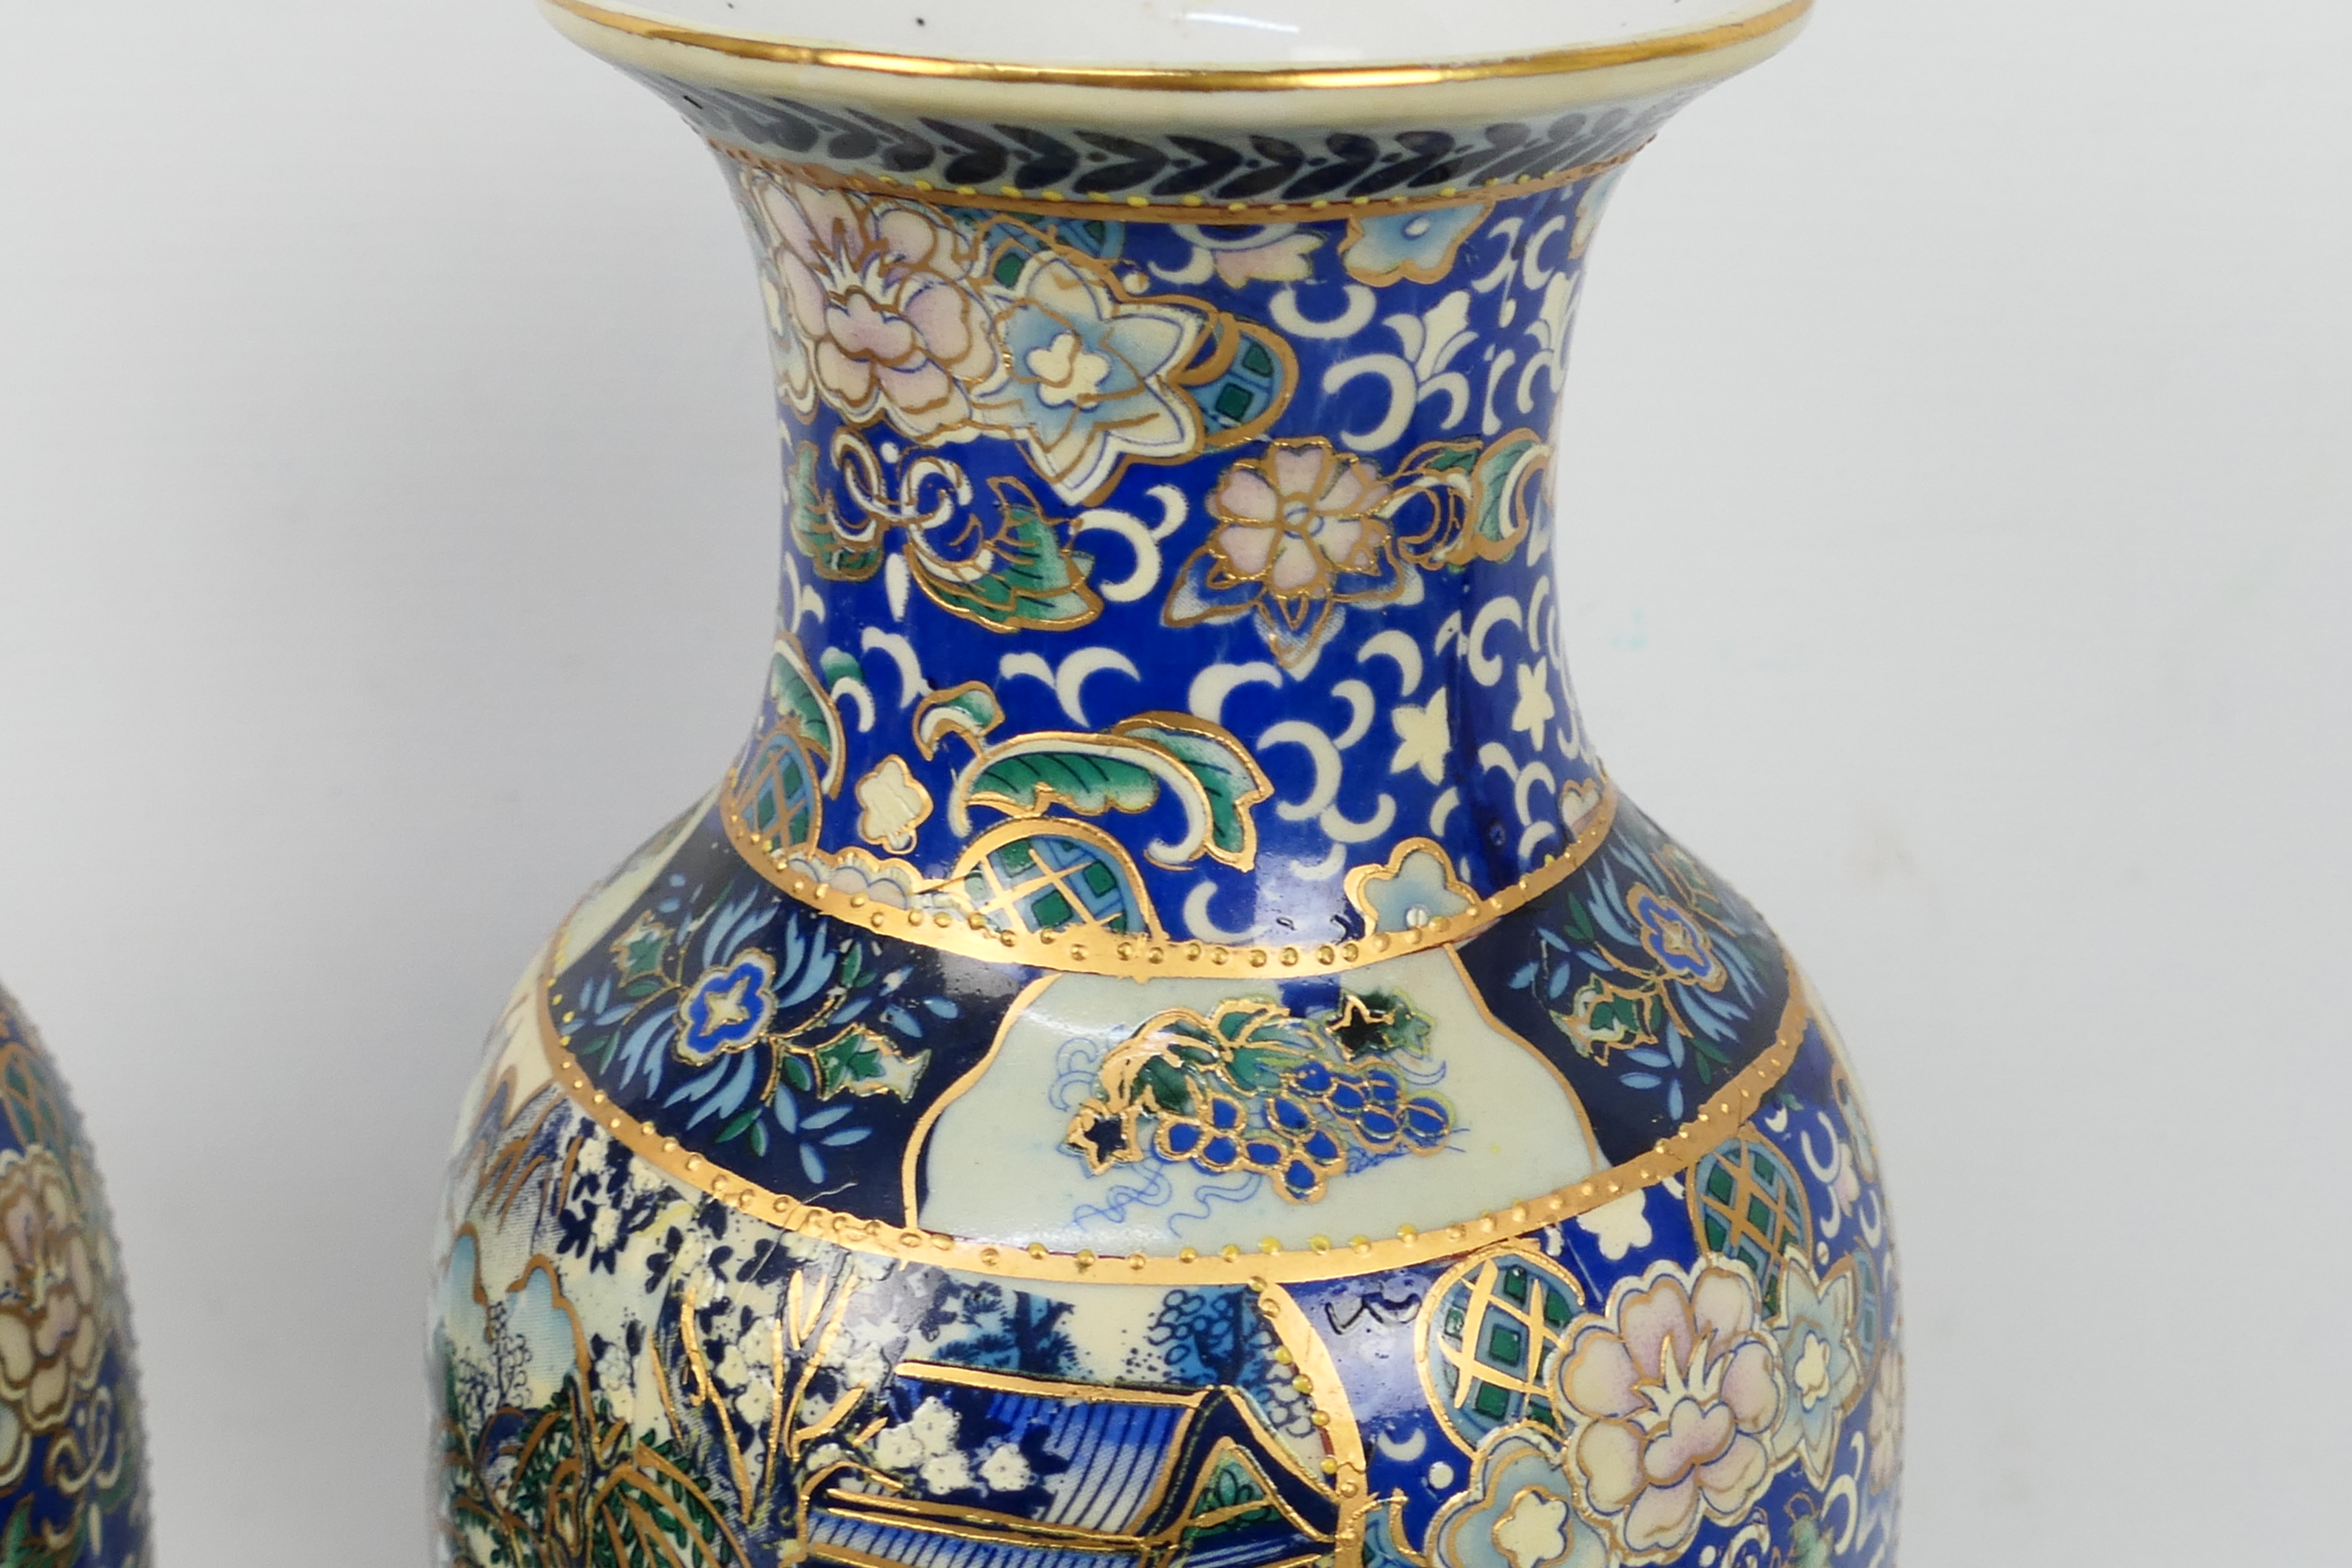 Lot to include a pair of Chinese vases, 30 cm (h), covered steins and Delft wares. - Image 12 of 16